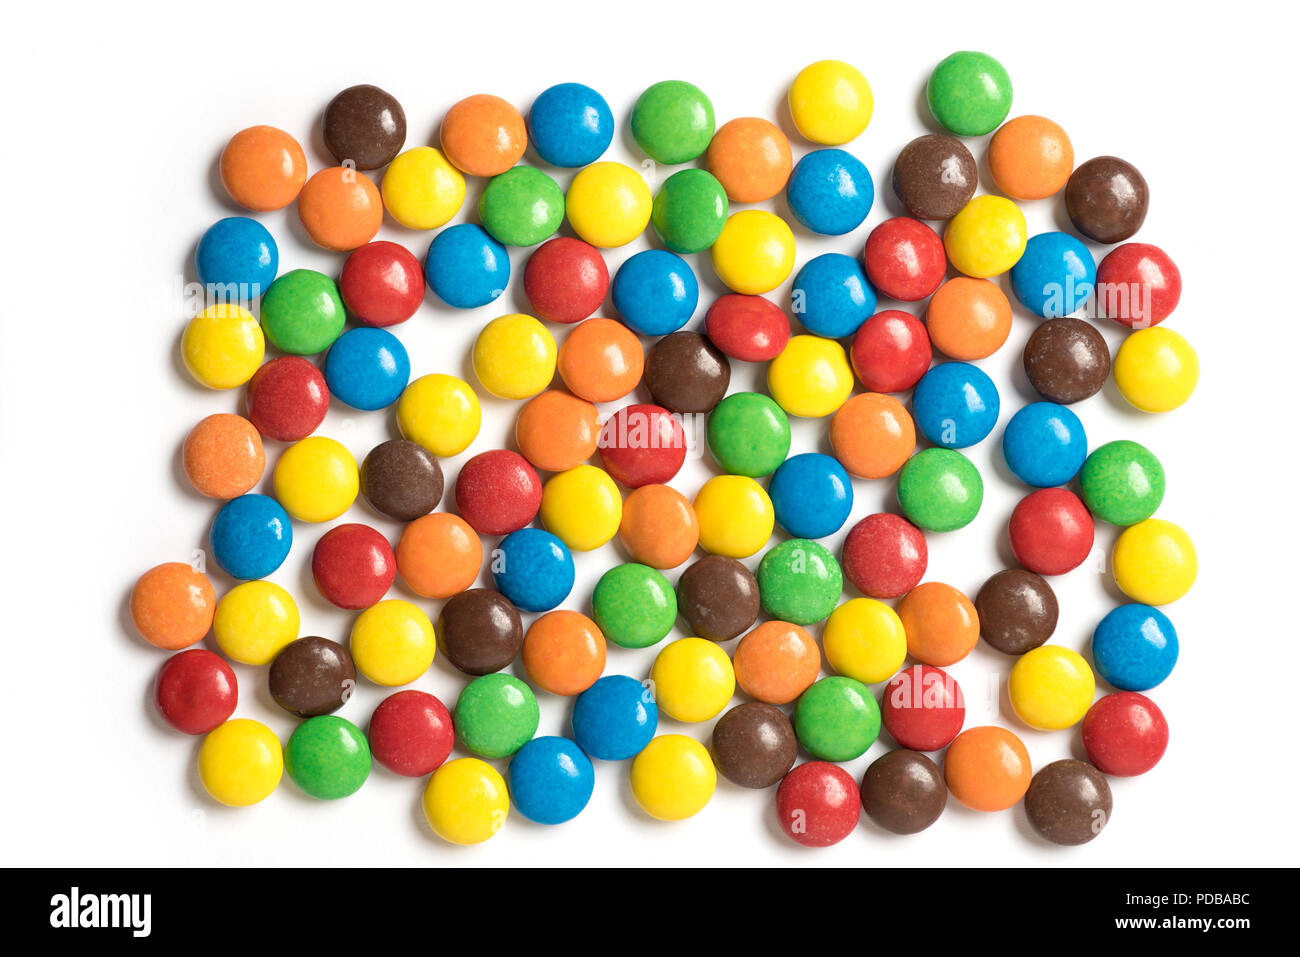 Florence, Italy - 2020, Jan 19: Red M&M character holds a candy